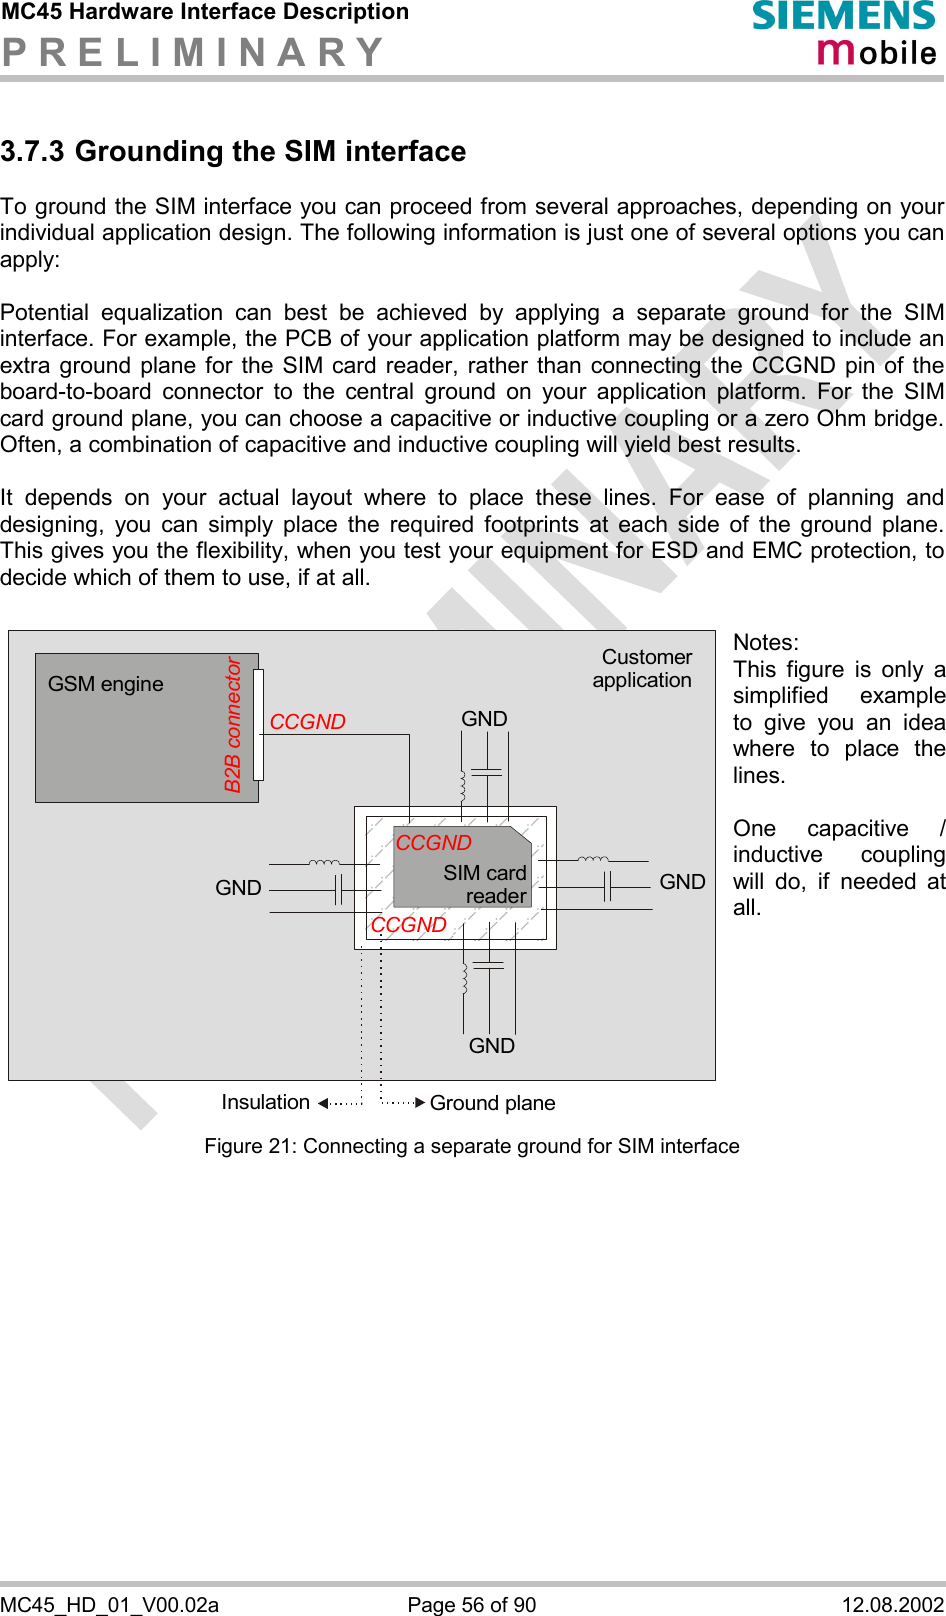 MC45 Hardware Interface Description P R E L I M I N A R Y      MC45_HD_01_V00.02a  Page 56 of 90  12.08.2002 3.7.3 Grounding the SIM interface To ground the SIM interface you can proceed from several approaches, depending on your individual application design. The following information is just one of several options you can apply:   Potential equalization can best be achieved by applying a separate ground for the SIM interface. For example, the PCB of your application platform may be designed to include an extra ground plane for the SIM card reader, rather than connecting the CCGND pin of the board-to-board connector to the central ground on your application platform. For the SIM card ground plane, you can choose a capacitive or inductive coupling or a zero Ohm bridge. Often, a combination of capacitive and inductive coupling will yield best results.   It depends on your actual layout where to place these lines. For ease of planning and designing, you can simply place the required footprints at each side of the ground plane. This gives you the flexibility, when you test your equipment for ESD and EMC protection, to decide which of them to use, if at all.  Figure 21: Connecting a separate ground for SIM interface   GSM engineGNDGND GNDGround planeInsulationGNDCustomerapplicationCCGNDSIM card readerCCGNDCCGNDB2B connectorNotes:  This figure is only a simplified example to give you an idea where to place the lines.   One capacitive / inductive coupling will do, if needed at all.  